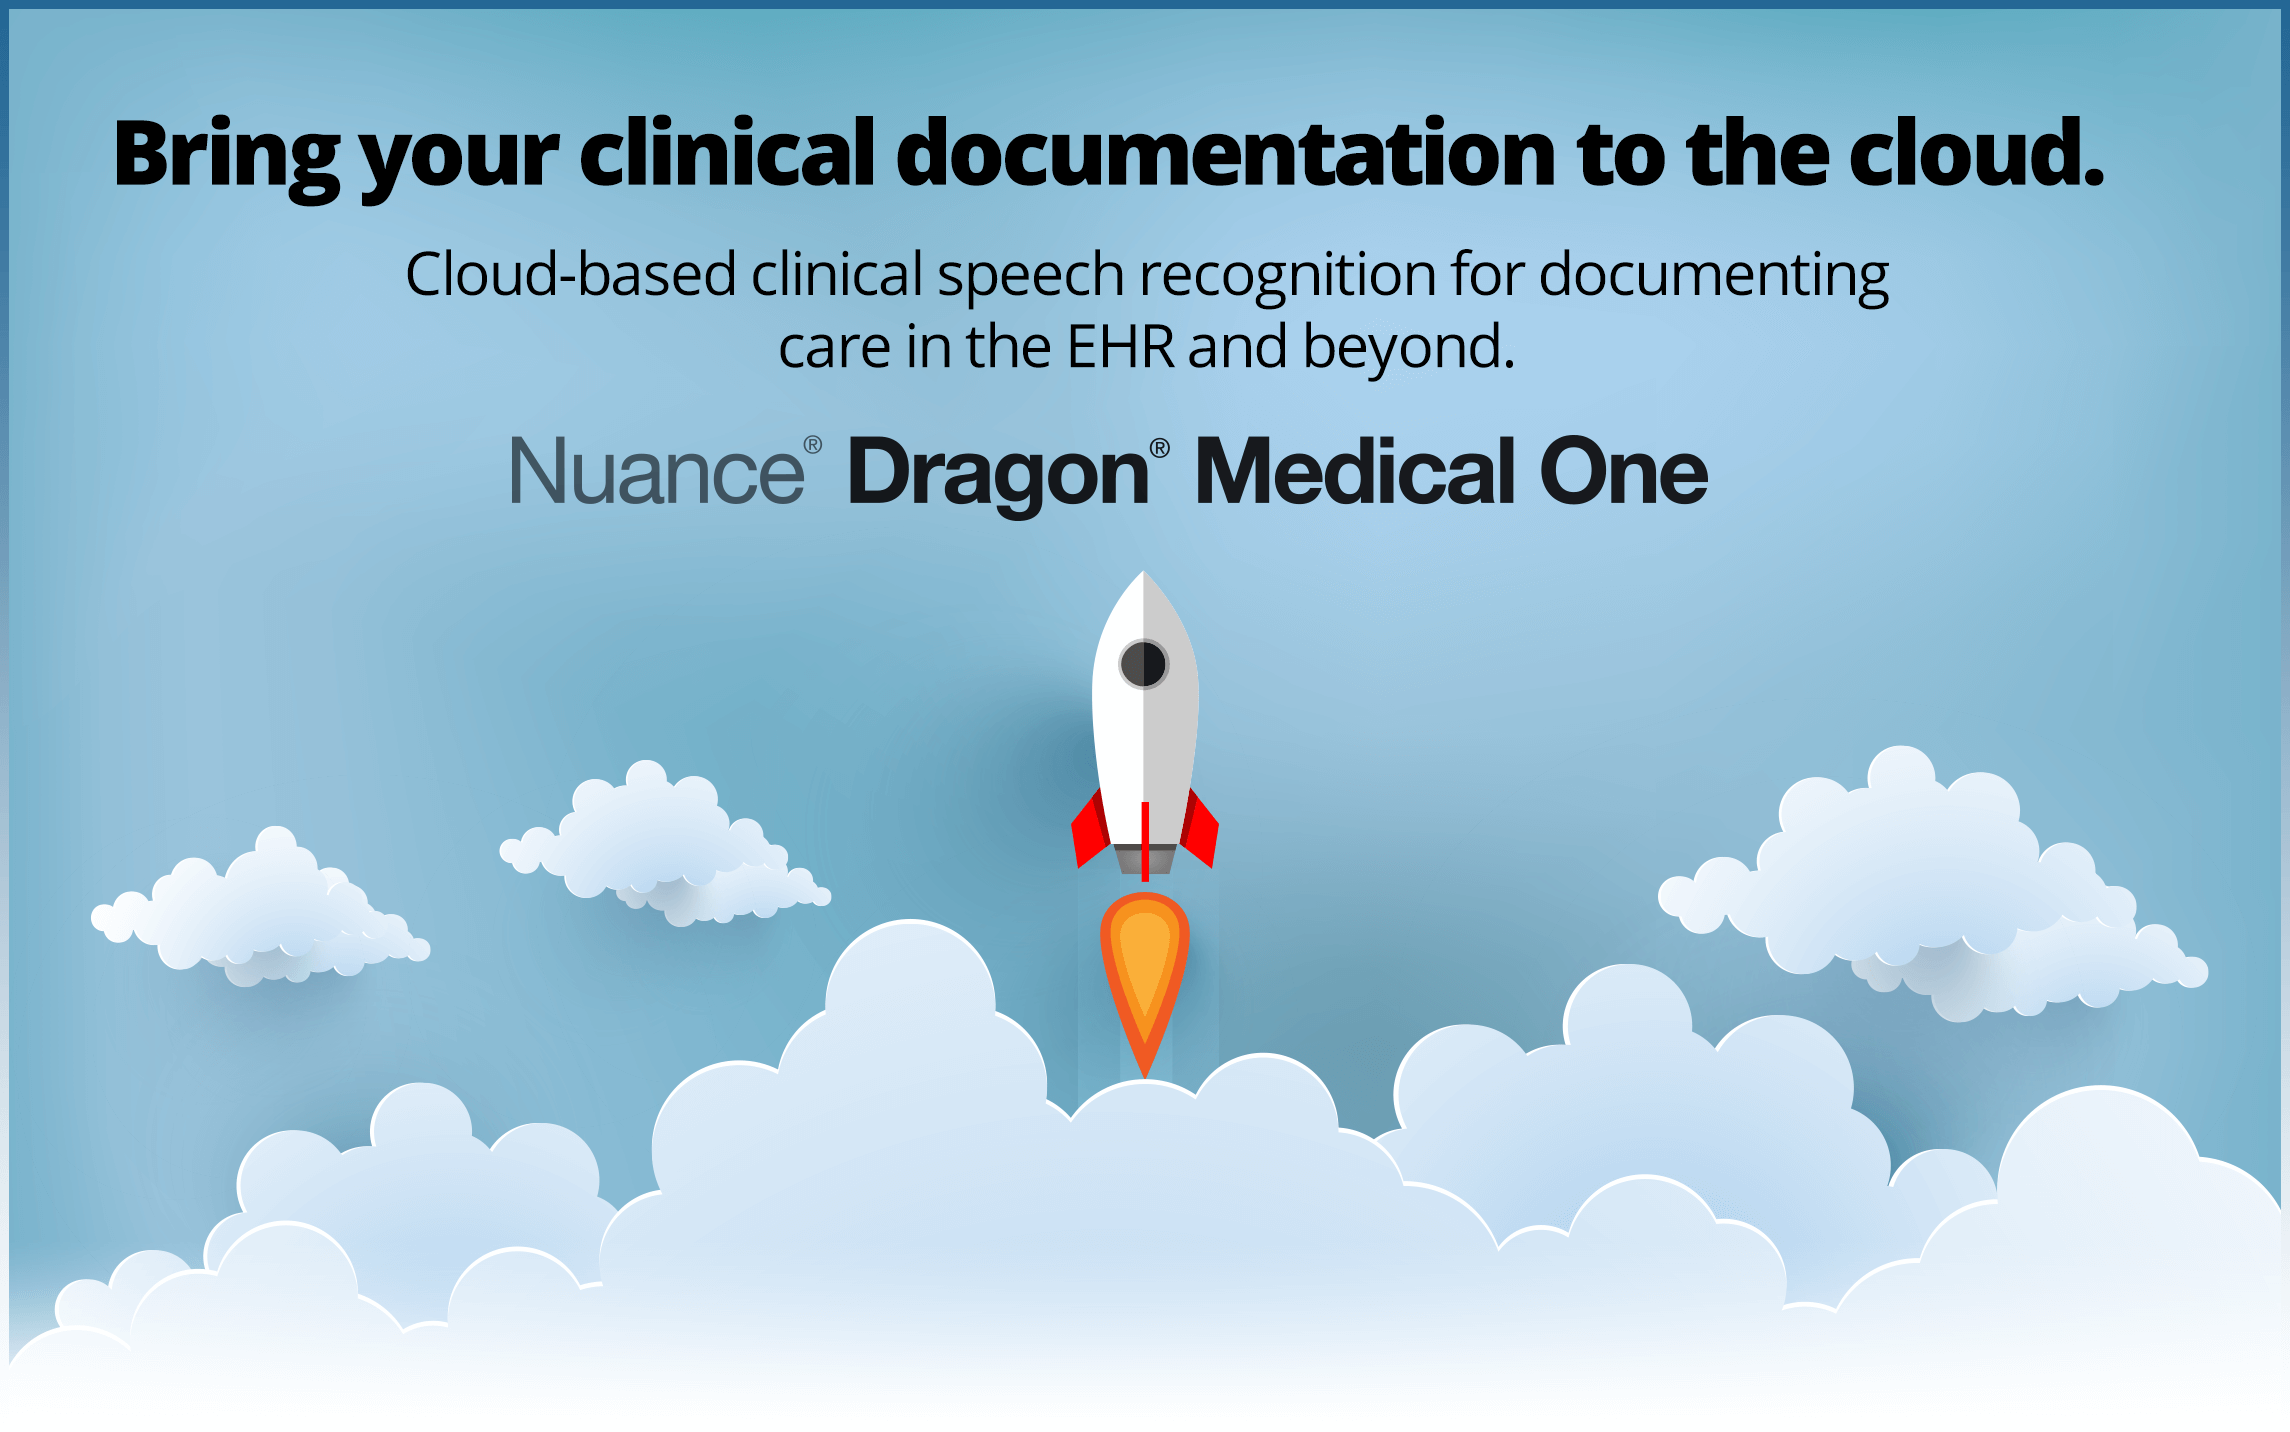 Bring your clinical documentation to the cloud. Nuance Dragon Medical One.